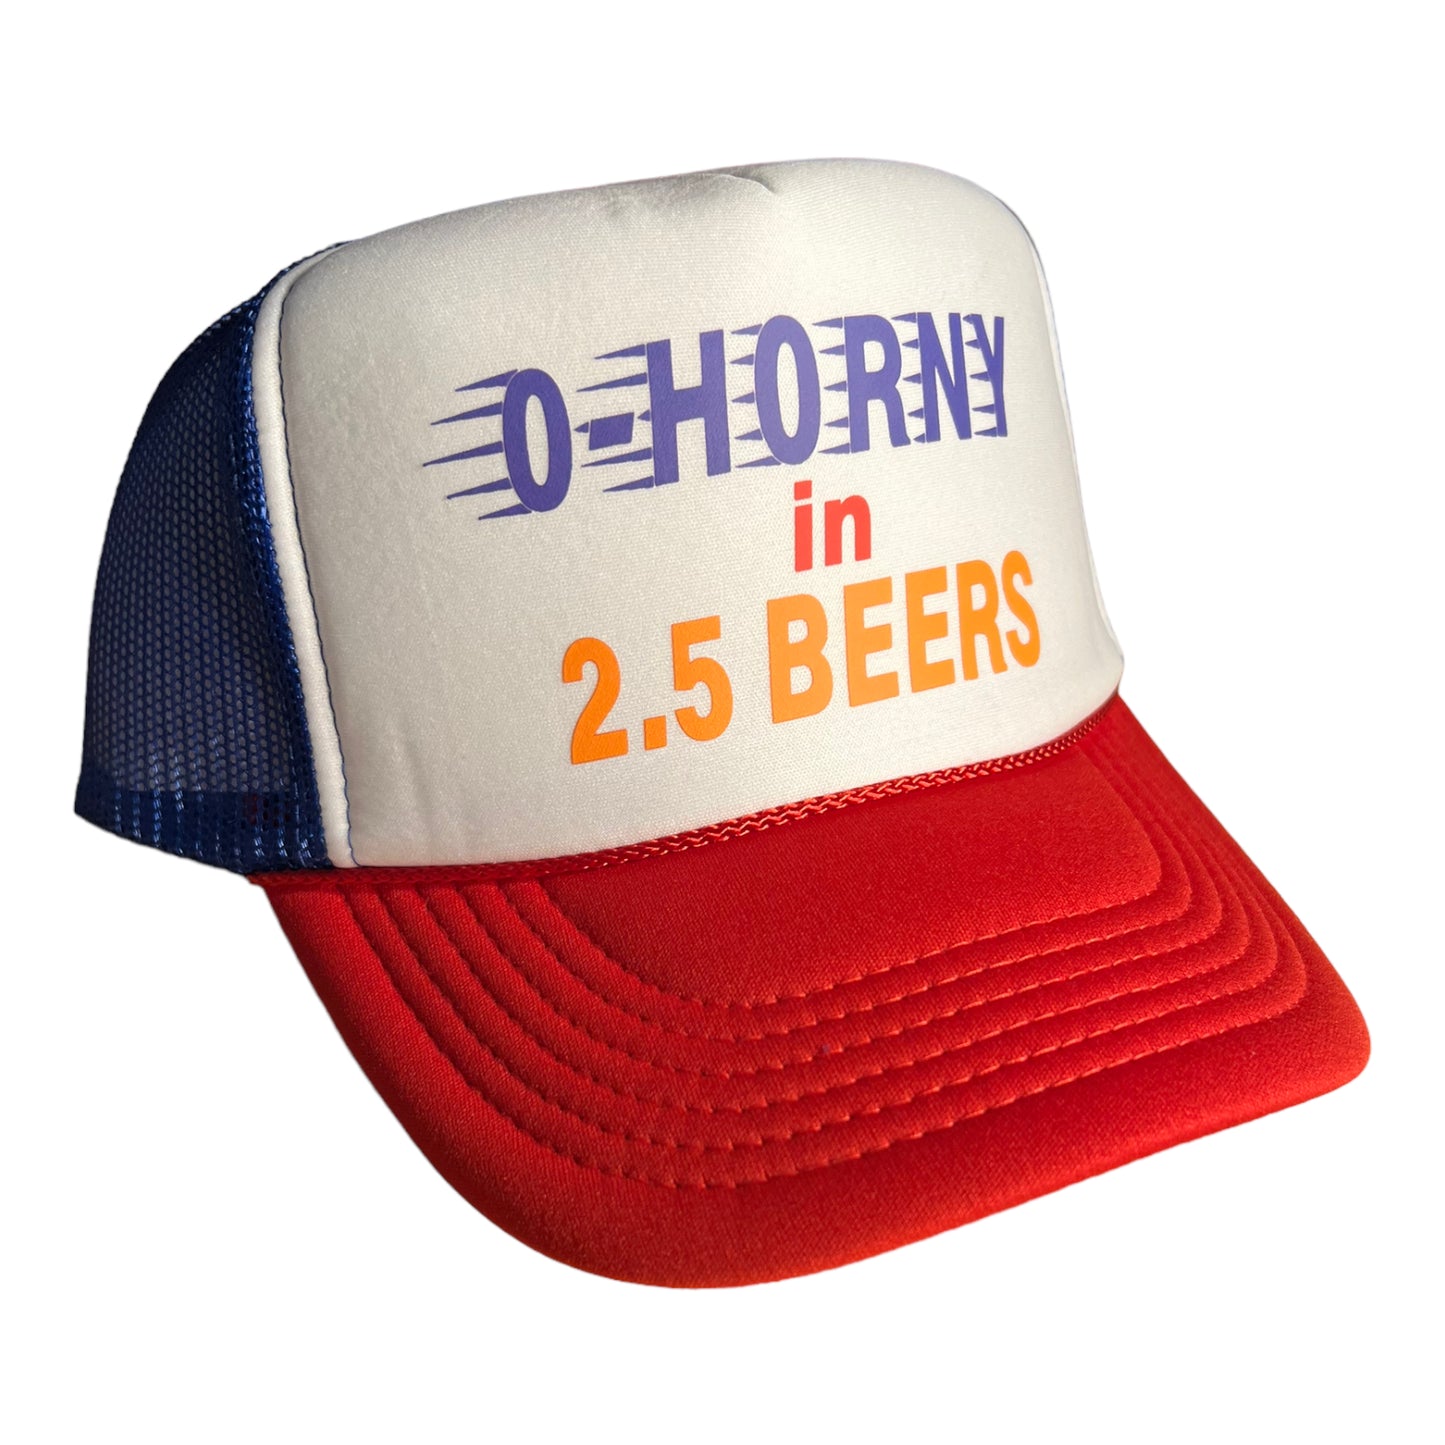 0- Horny In 2.5 beers Trucker Hat Funny Trucker Hat Red/White/Blue